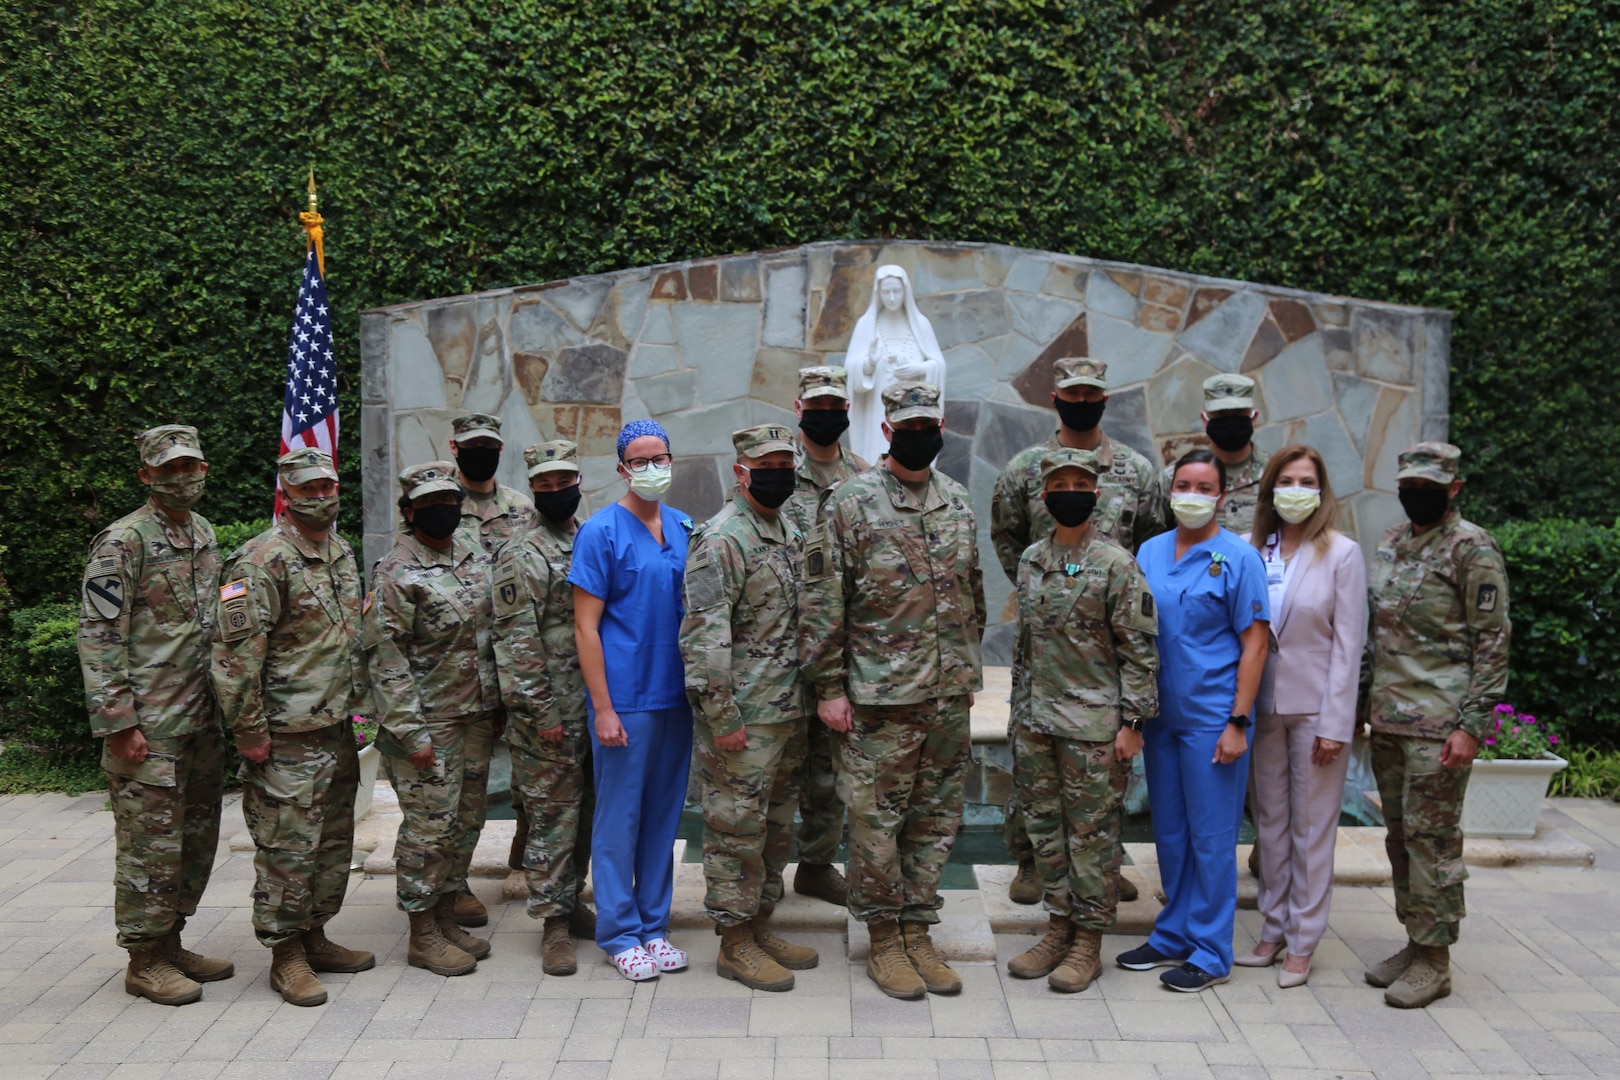 Group of Soldiers and medical personnel.